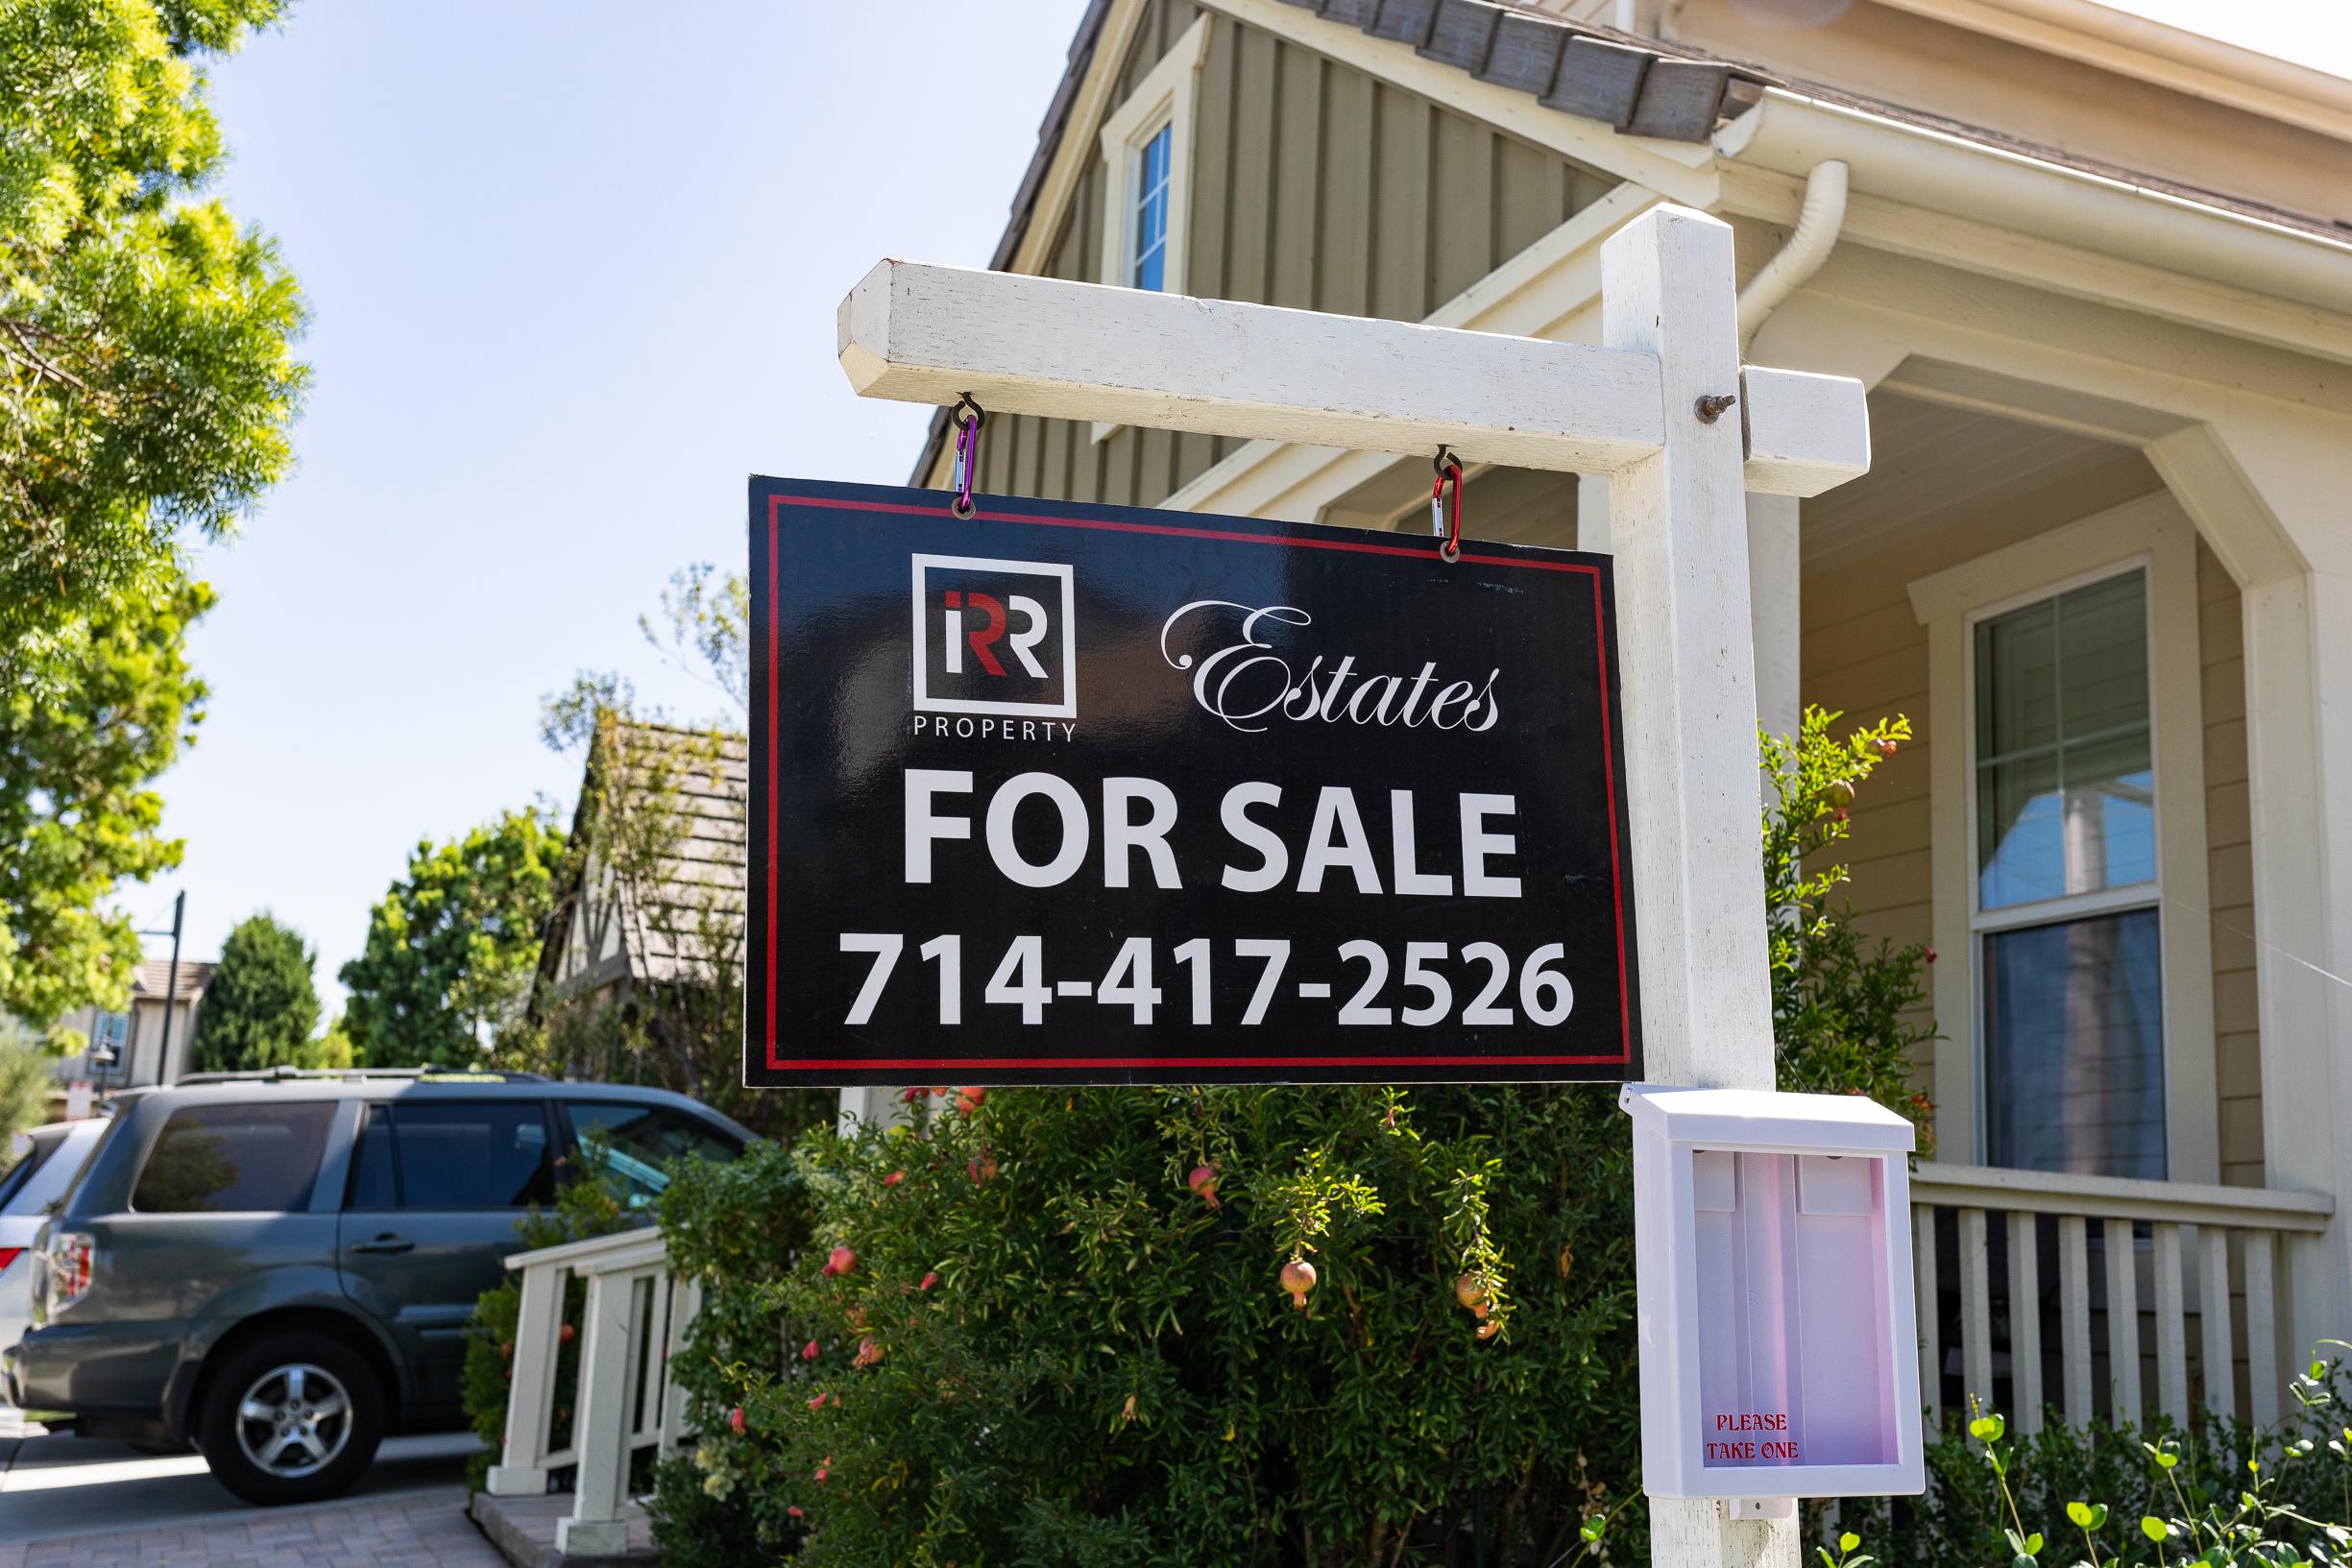 California Law Allows Homeowners to Sell ADUs as Condos